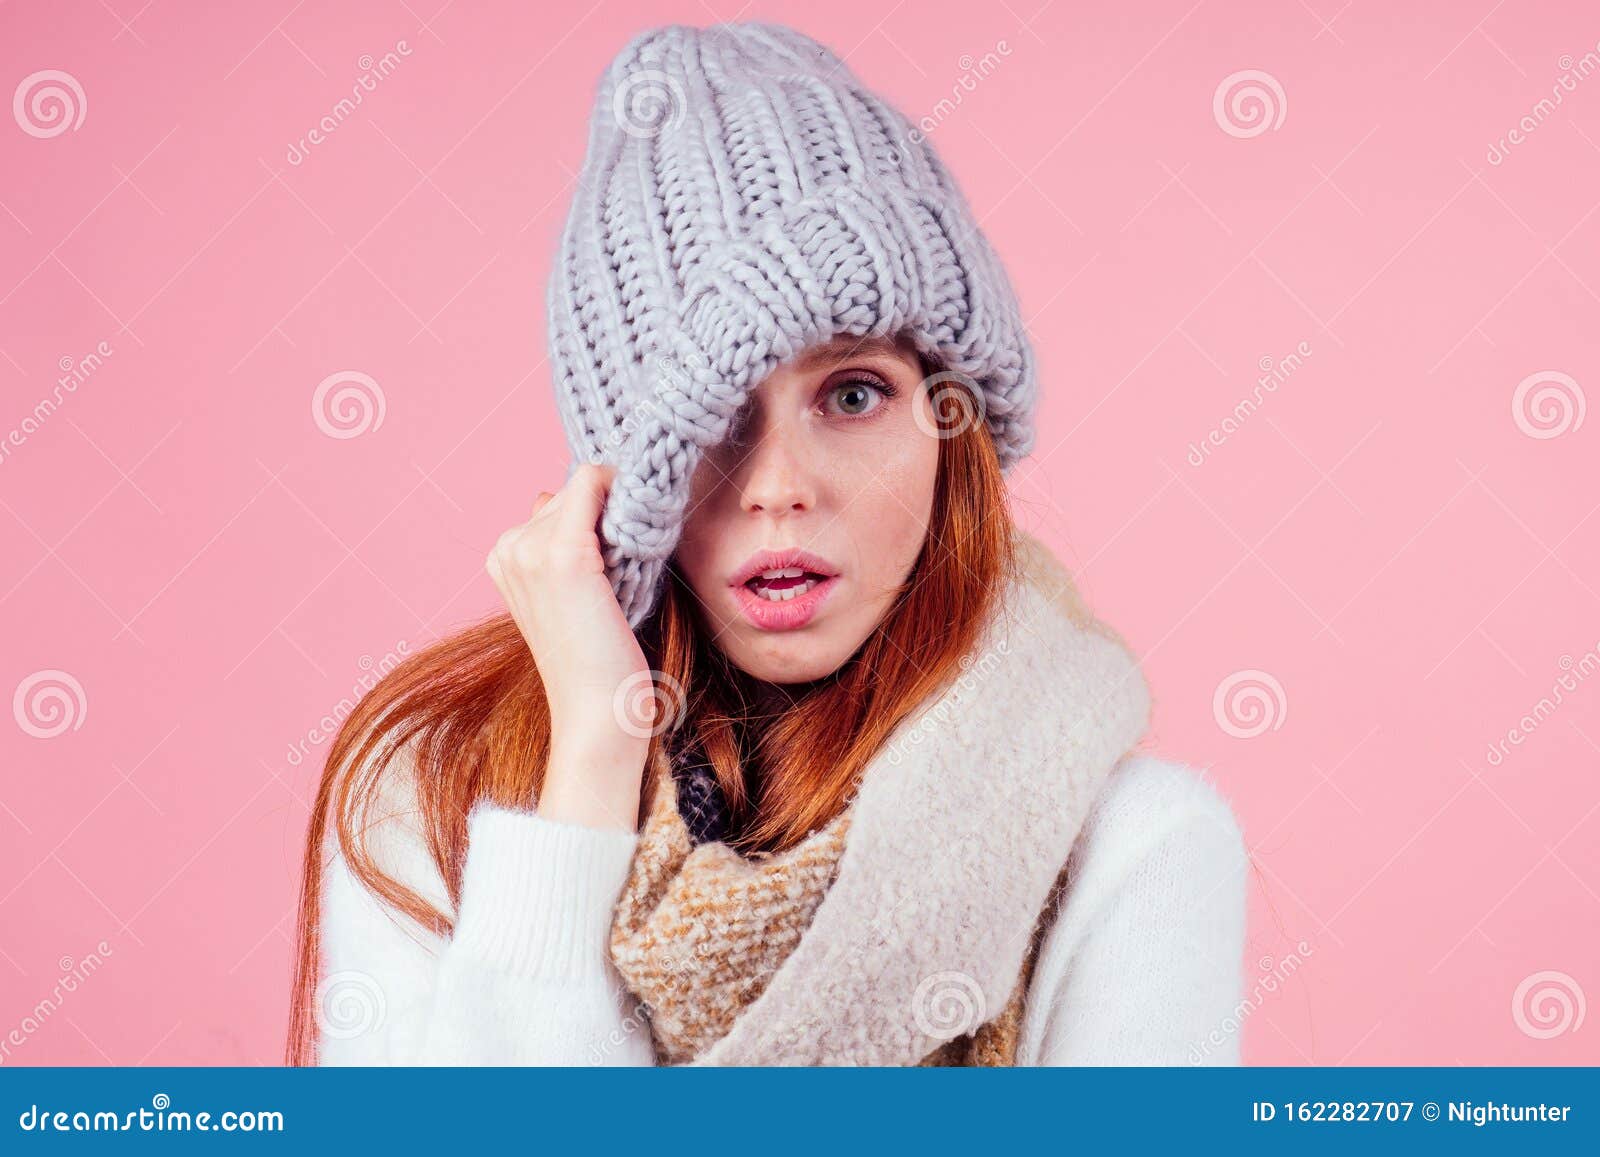 Shy Redhead Ginger Woman Putting A Knitted Spiky Hat On His Head Hiding Eye And Open Mouth In